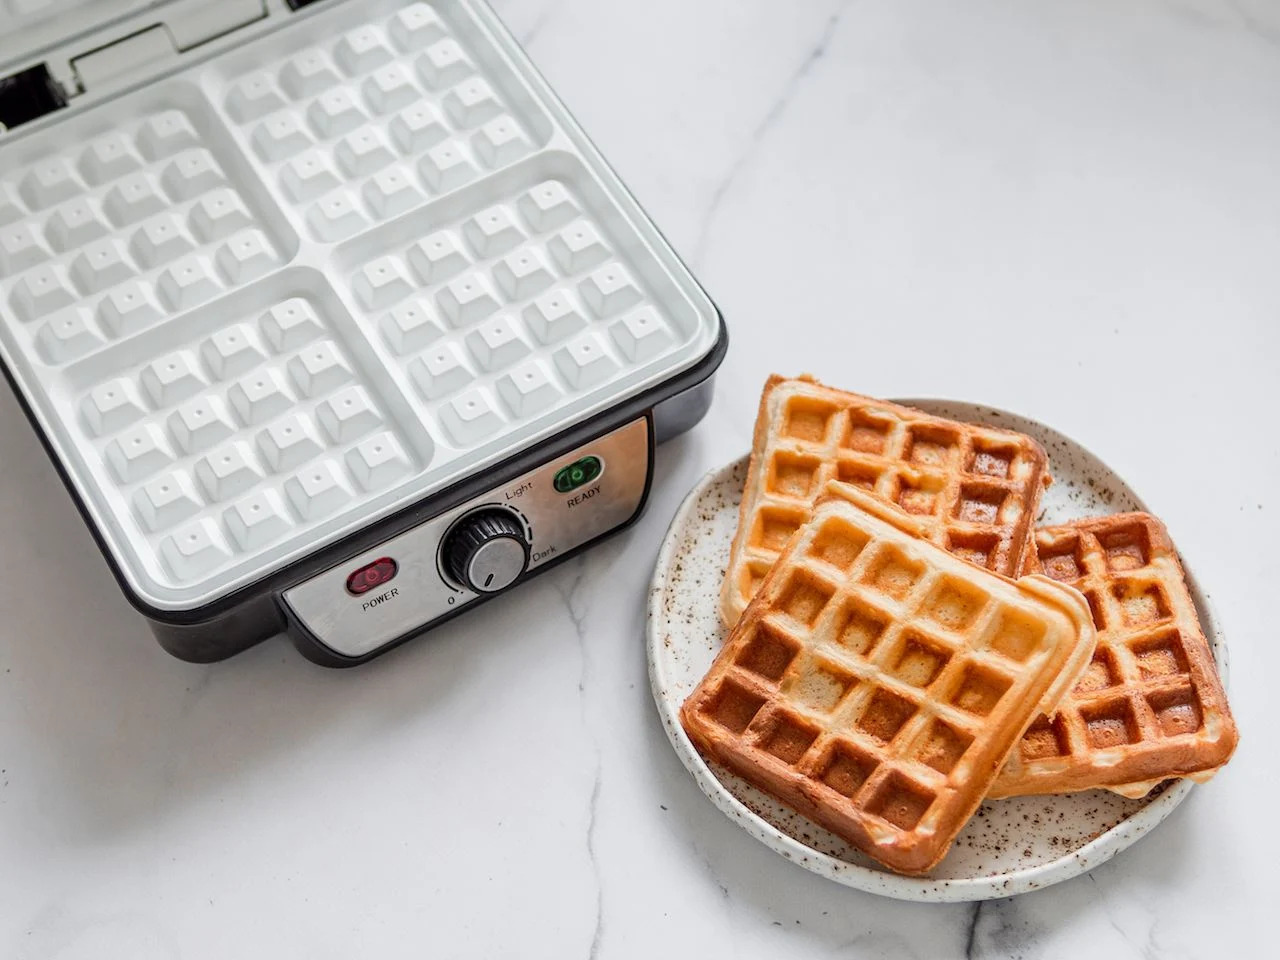 How Long Do You Cook Waffles For In A Waffle Iron